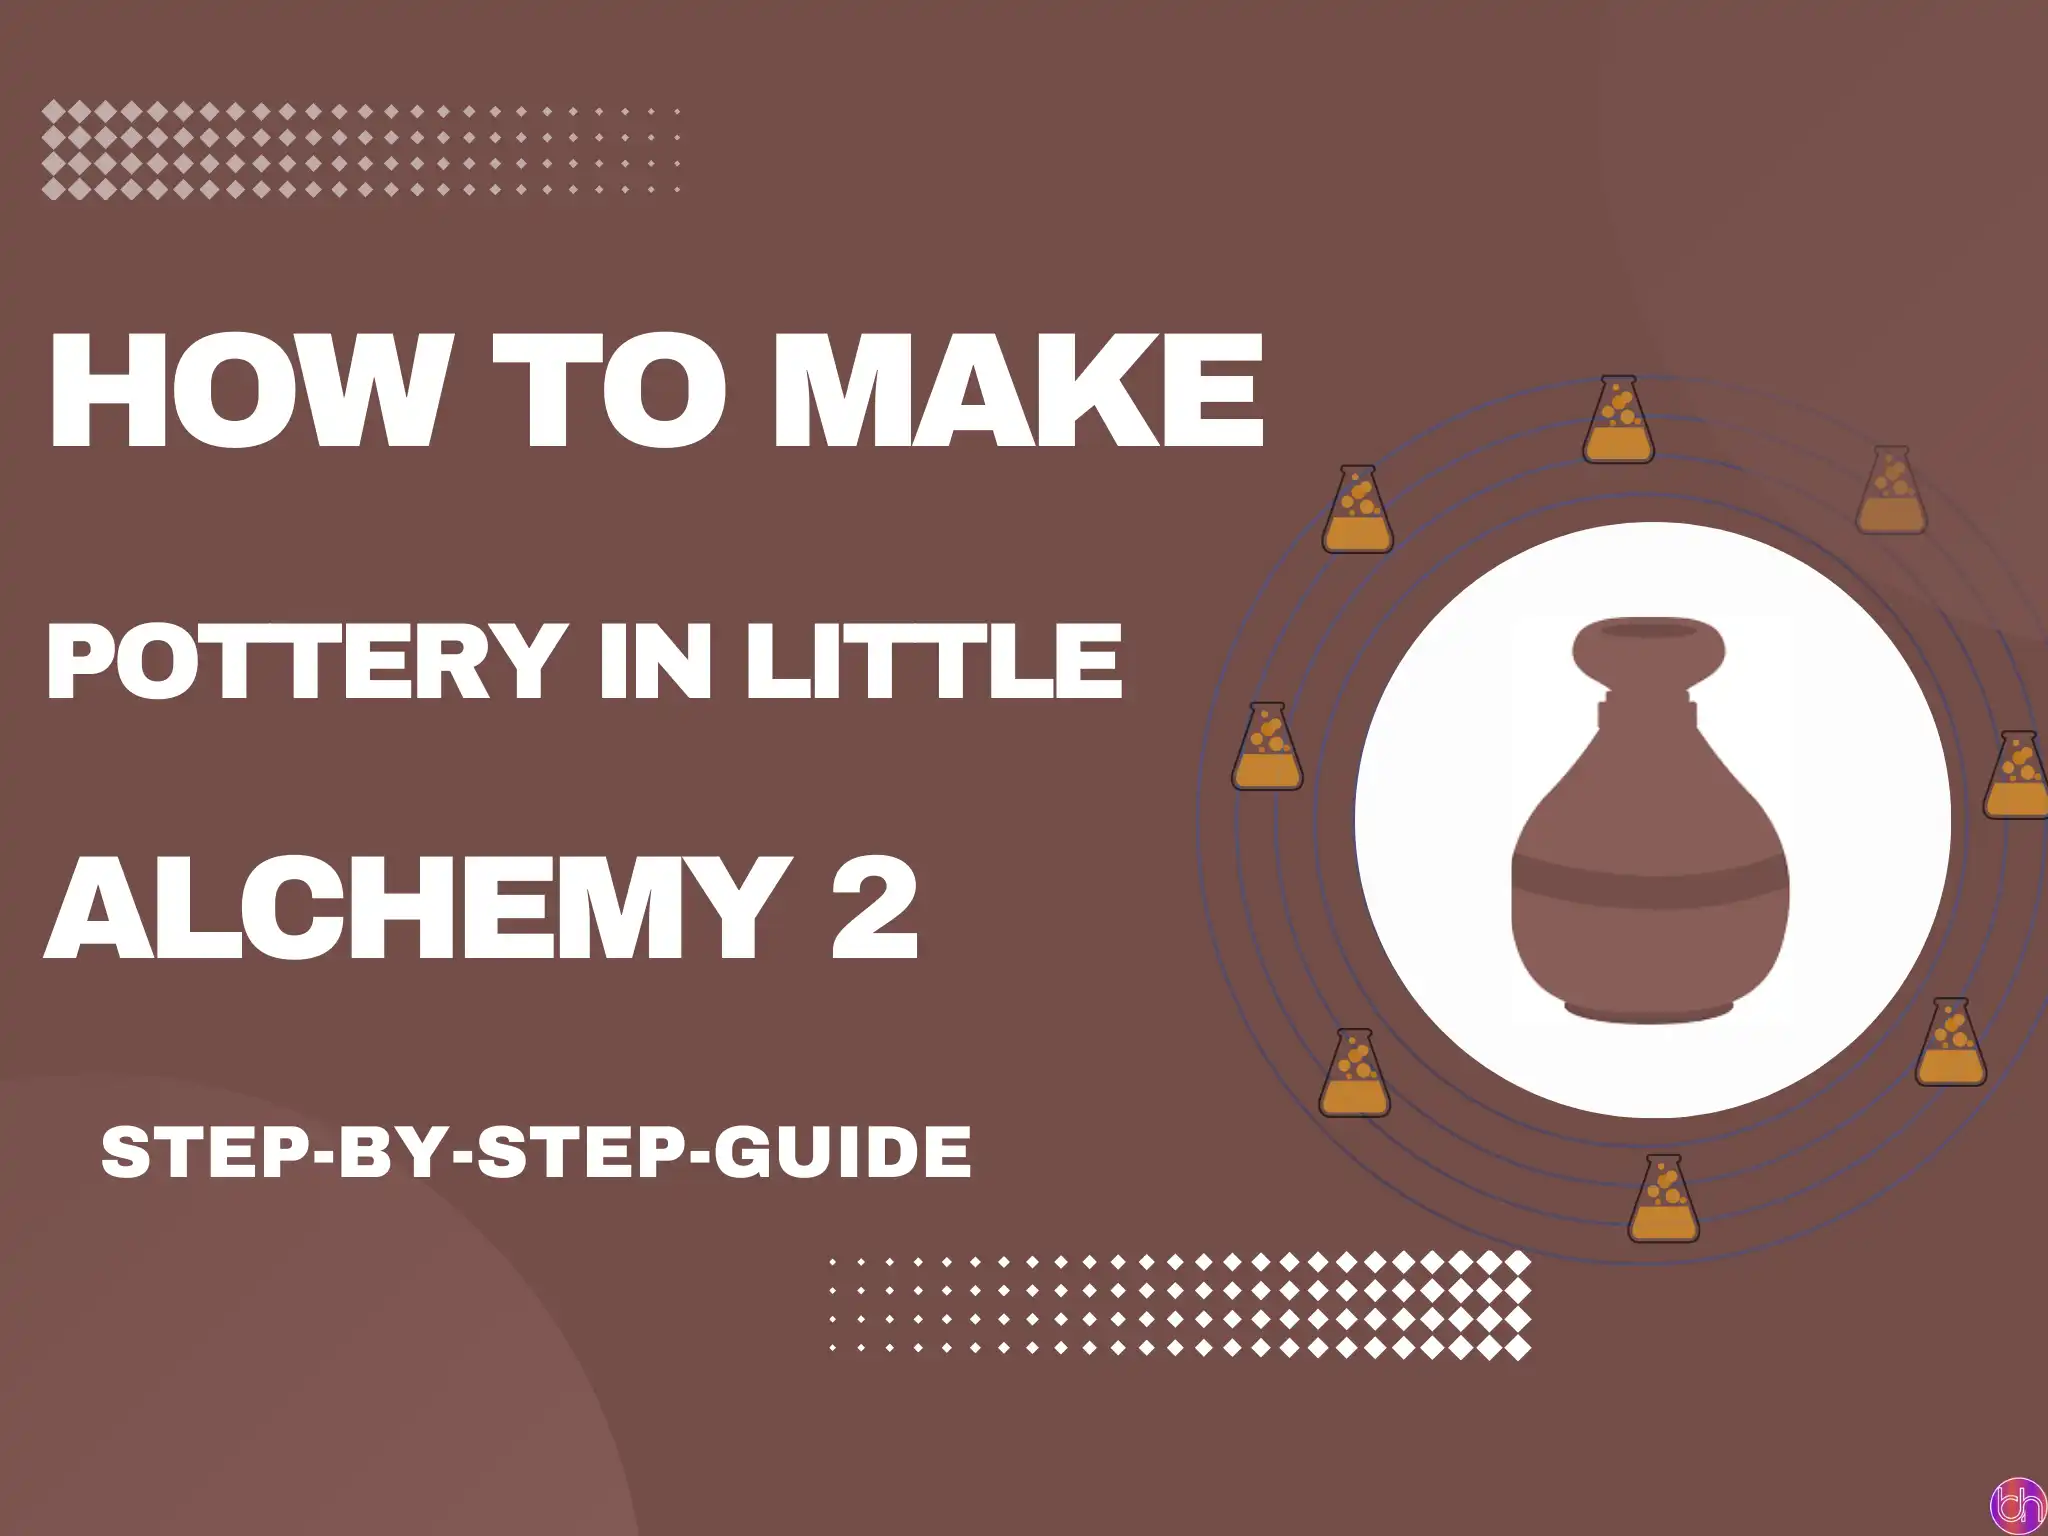 How to make Pottery in Little Alchemy 2